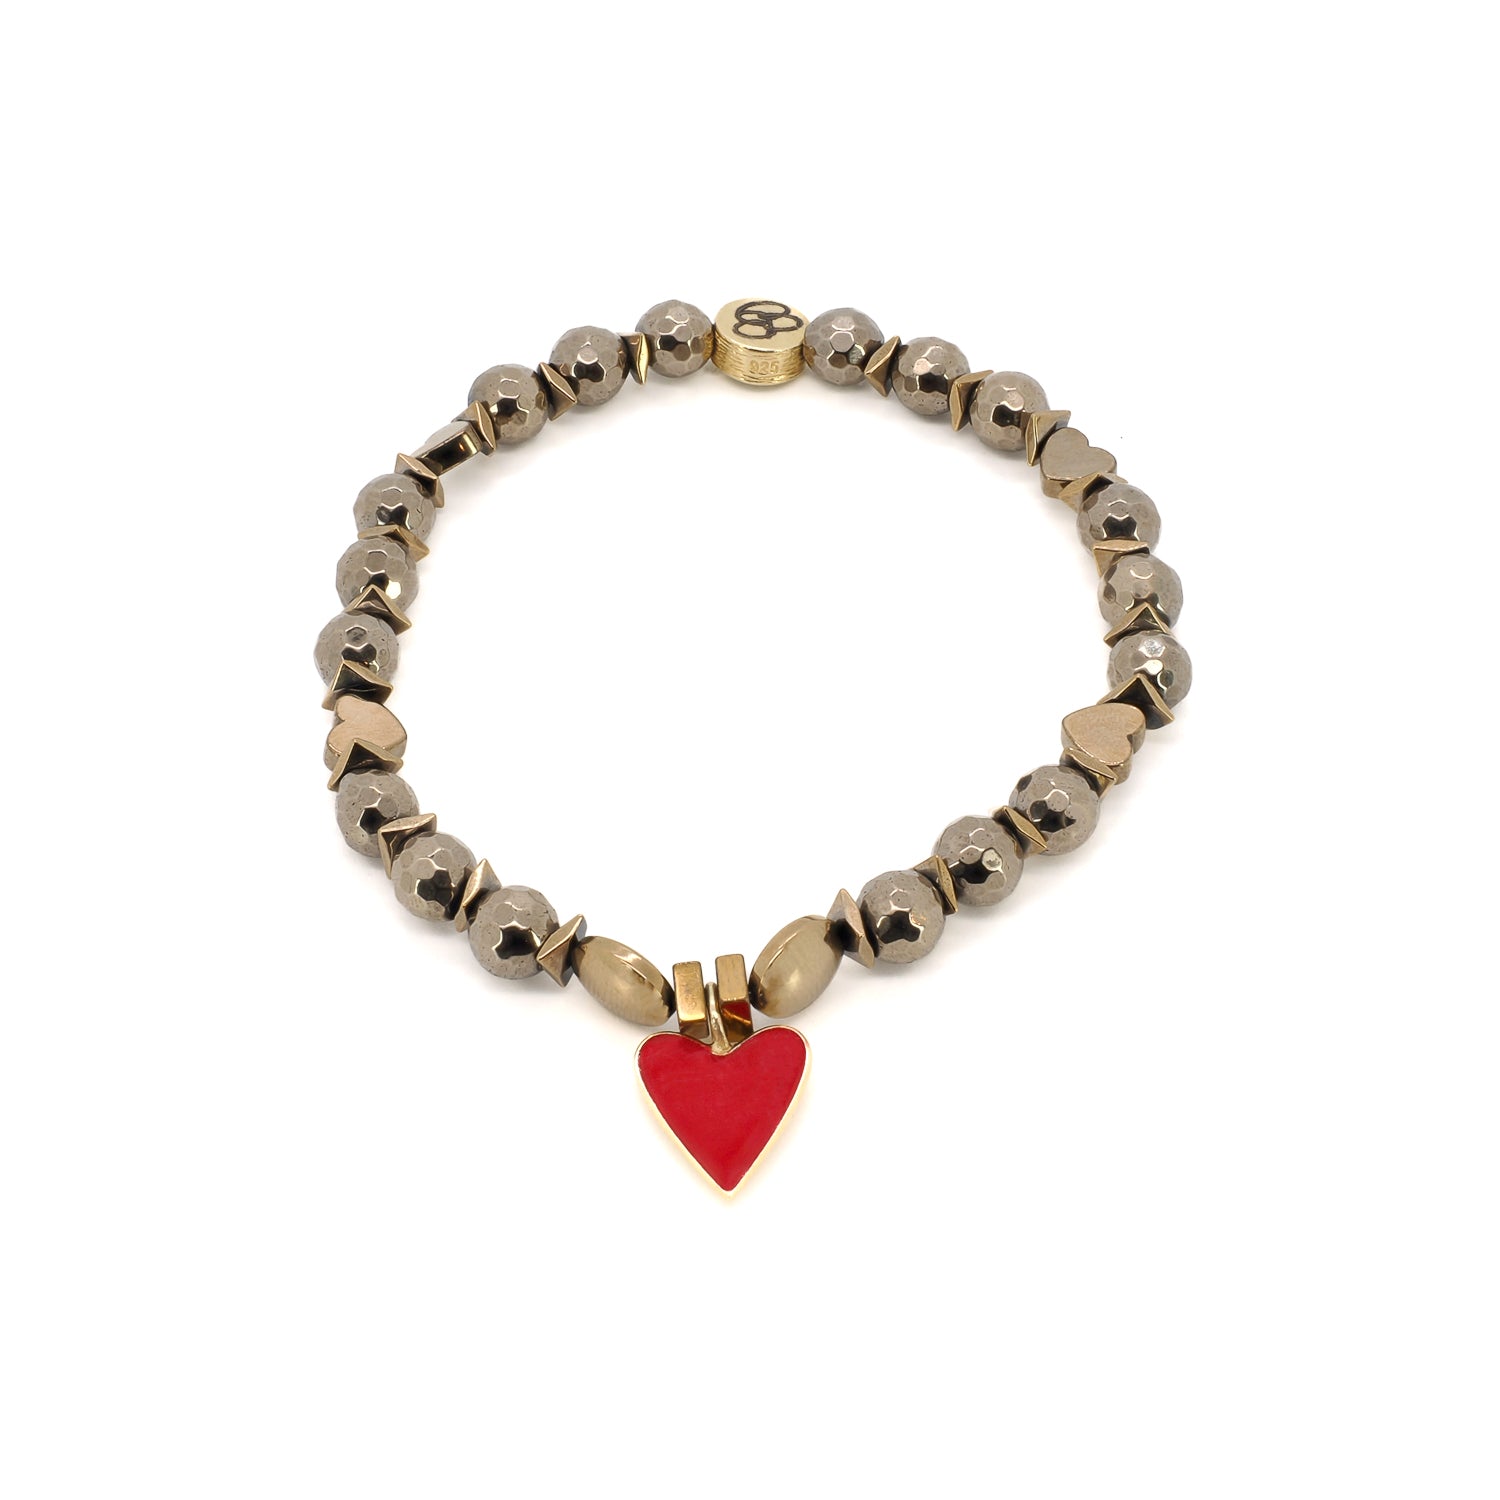 The Red Heart Gold Hematite Stone Love Beaded Bracelet is a beautiful and unique piece of jewelry that combines heart-shaped hematite stone beads with gold-colored hematite stone beads.